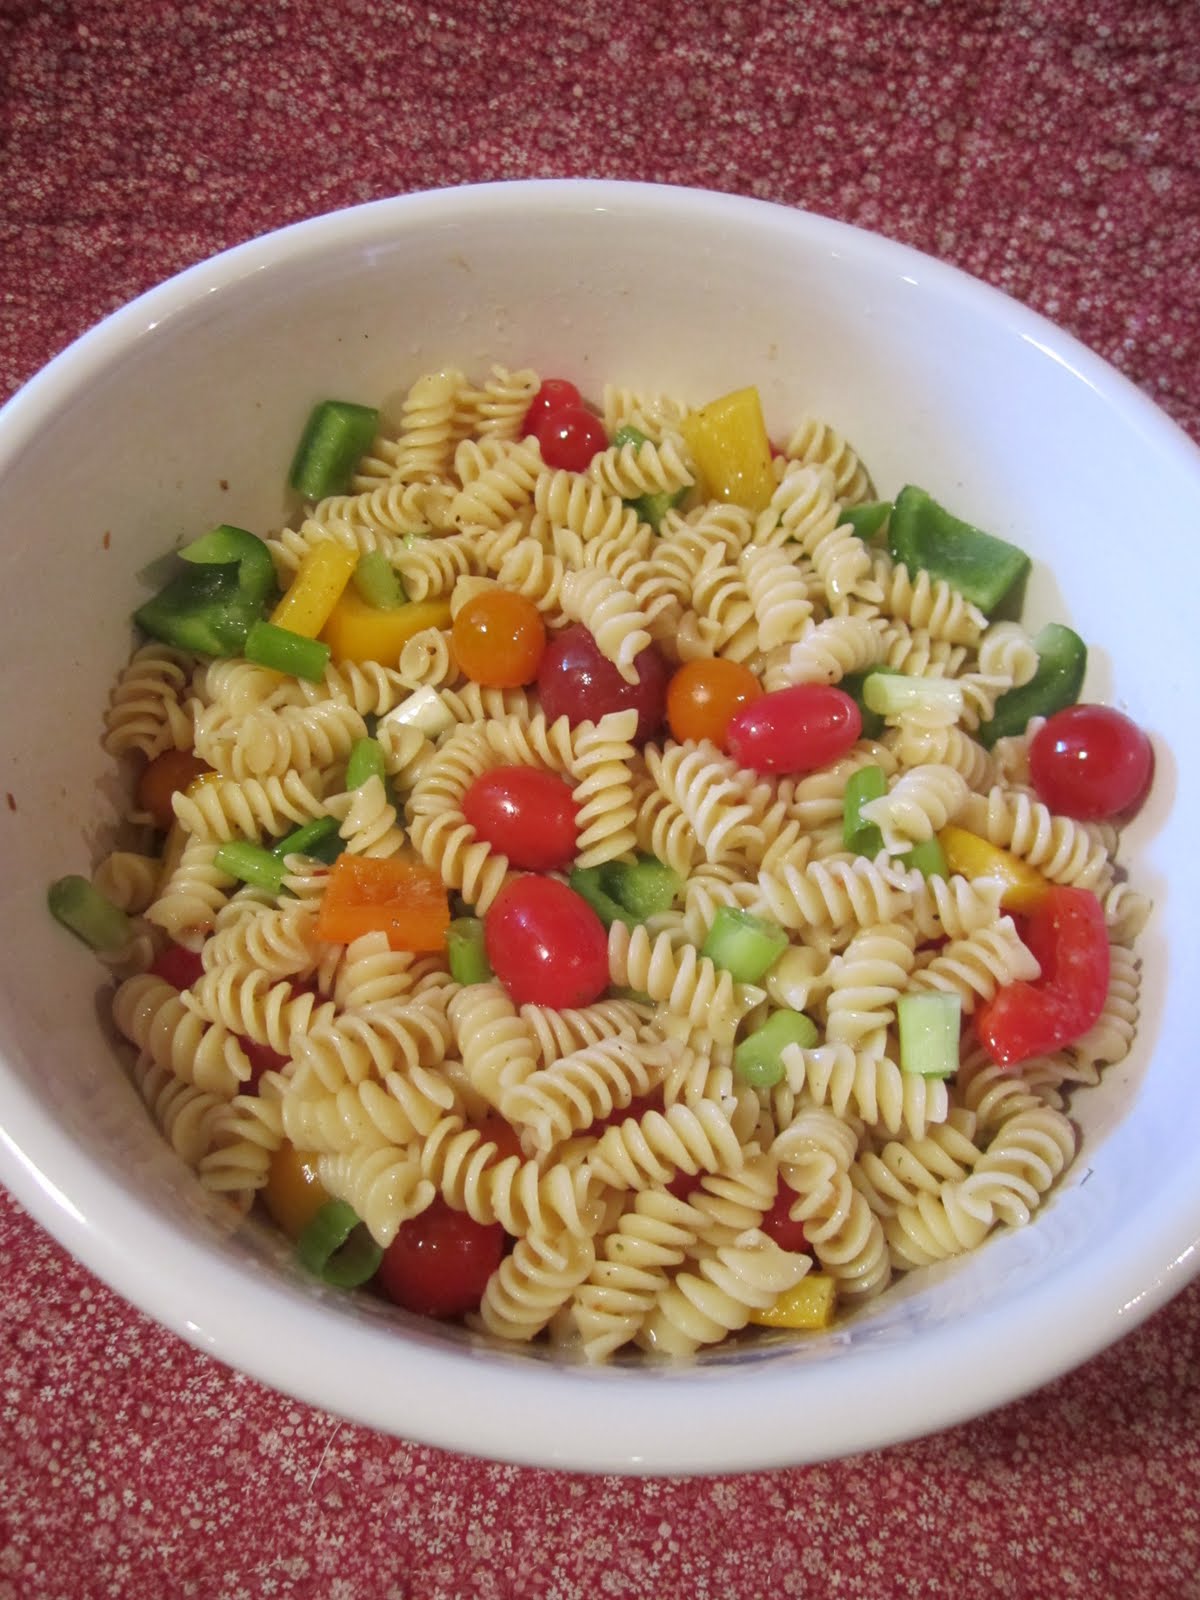 How to Make a Cold Pasta Salad {Recipe} - Wendys Hat